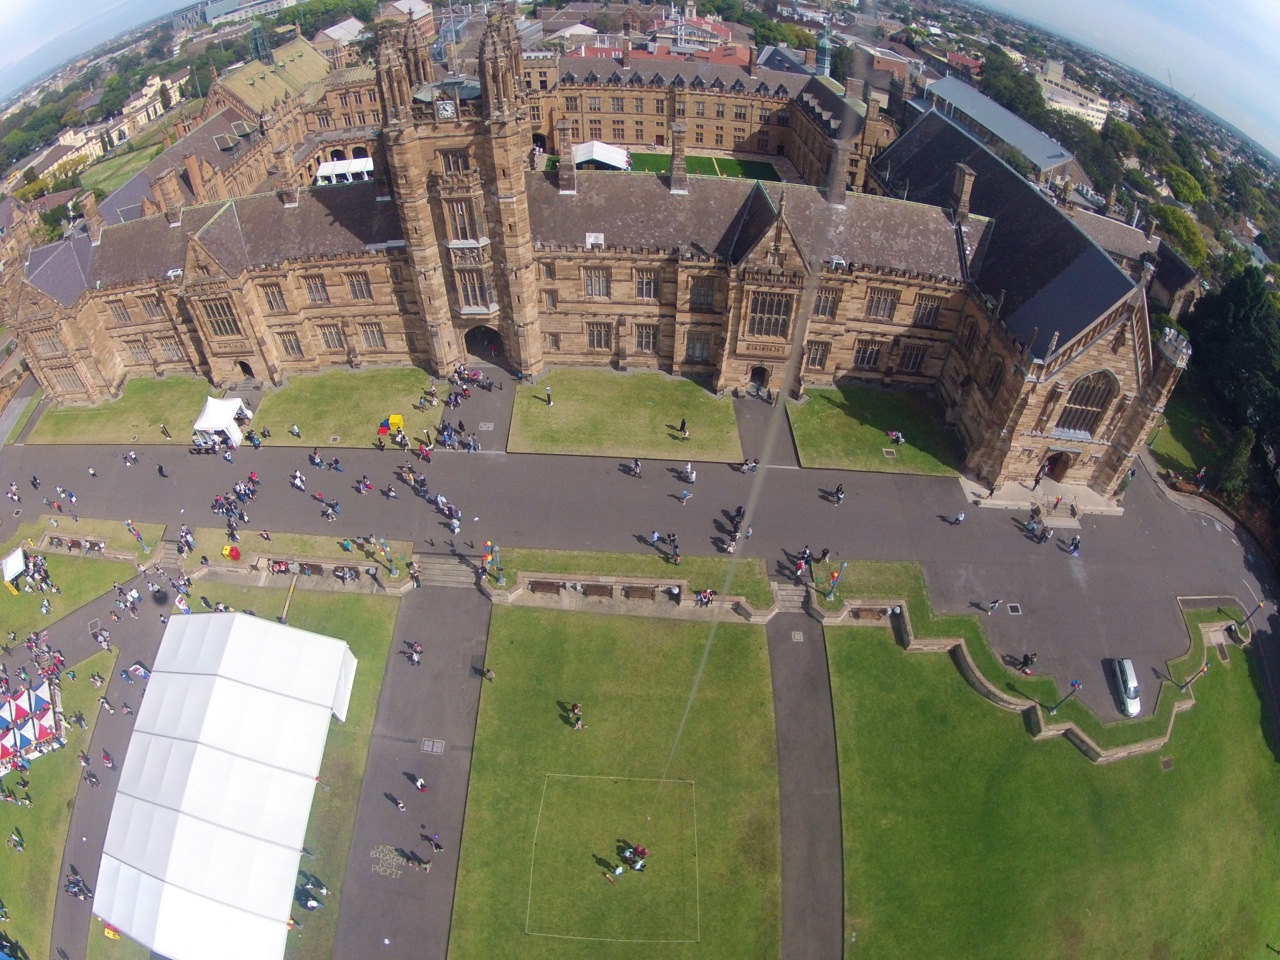 Sydney University Open Day (from a weather balloon)